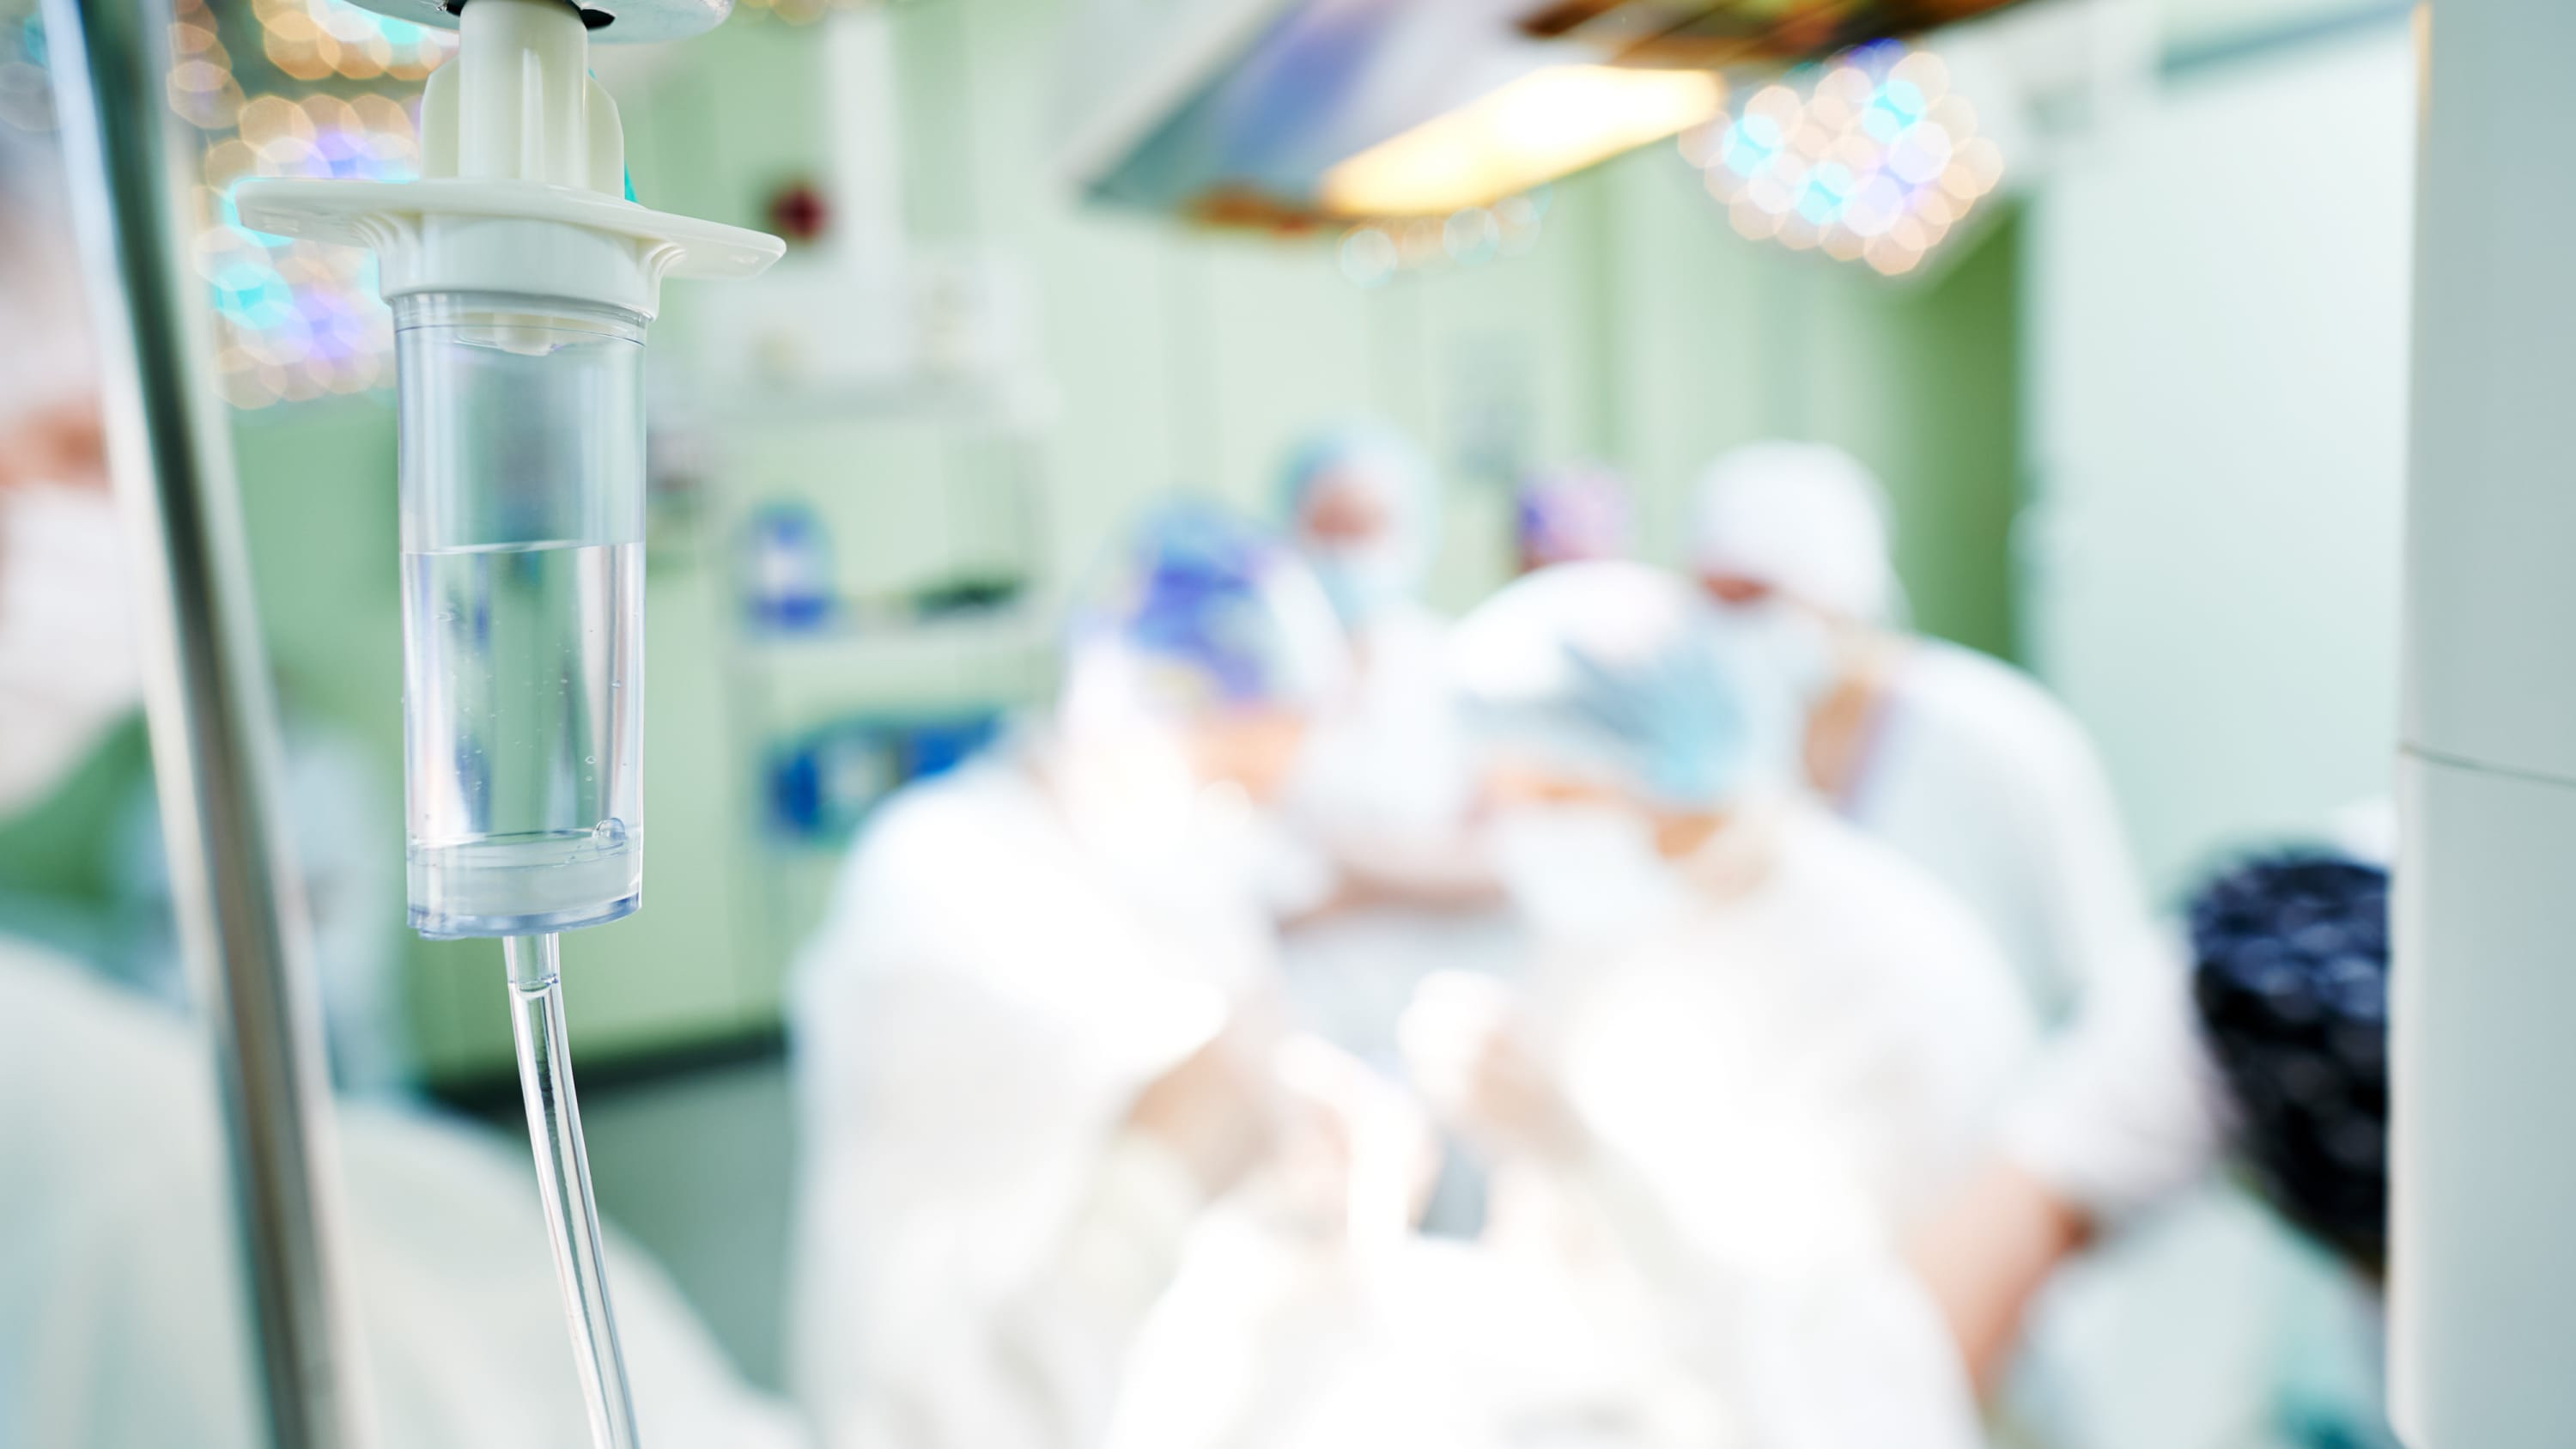 A view of an emergency operating room where anesthesia for atrial fibrillation may be delivered to a patient.